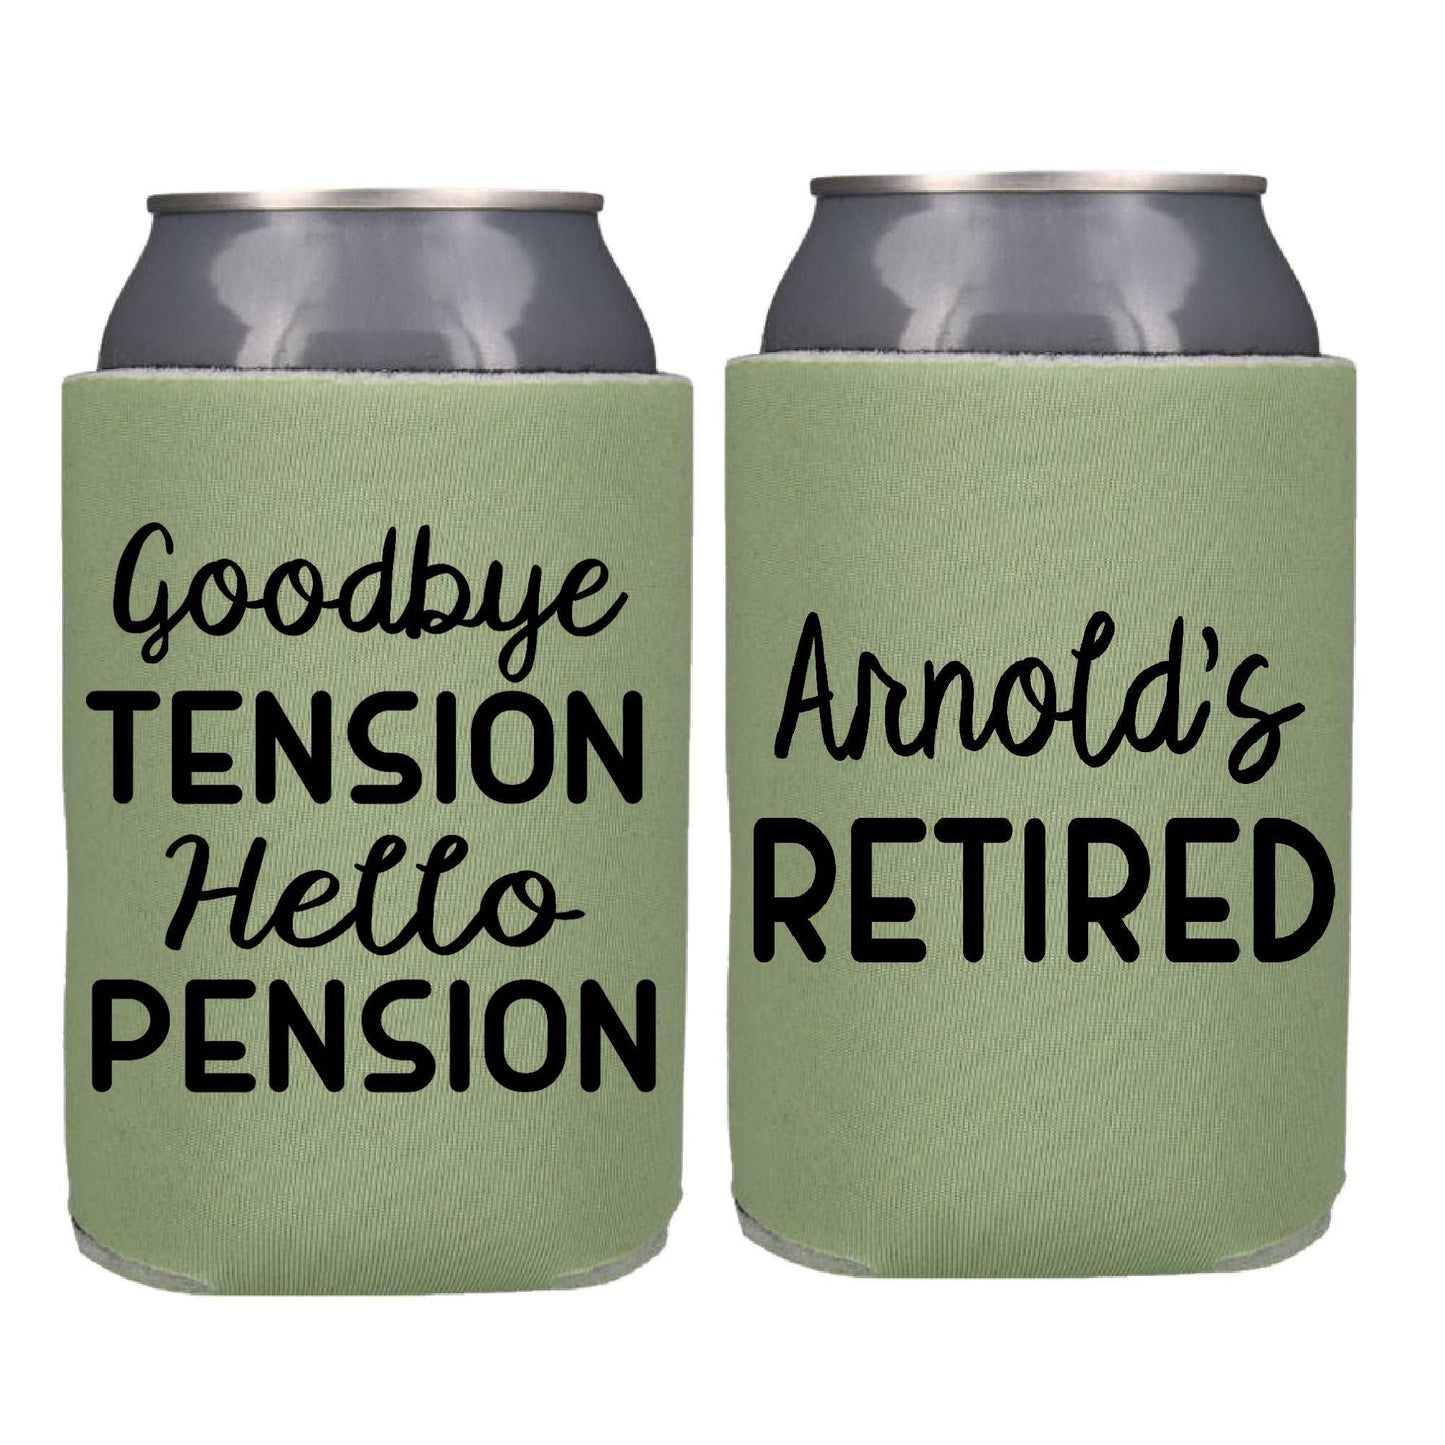 Goodbye Tension Hello Pension Retirement Screen printed Can Cooler